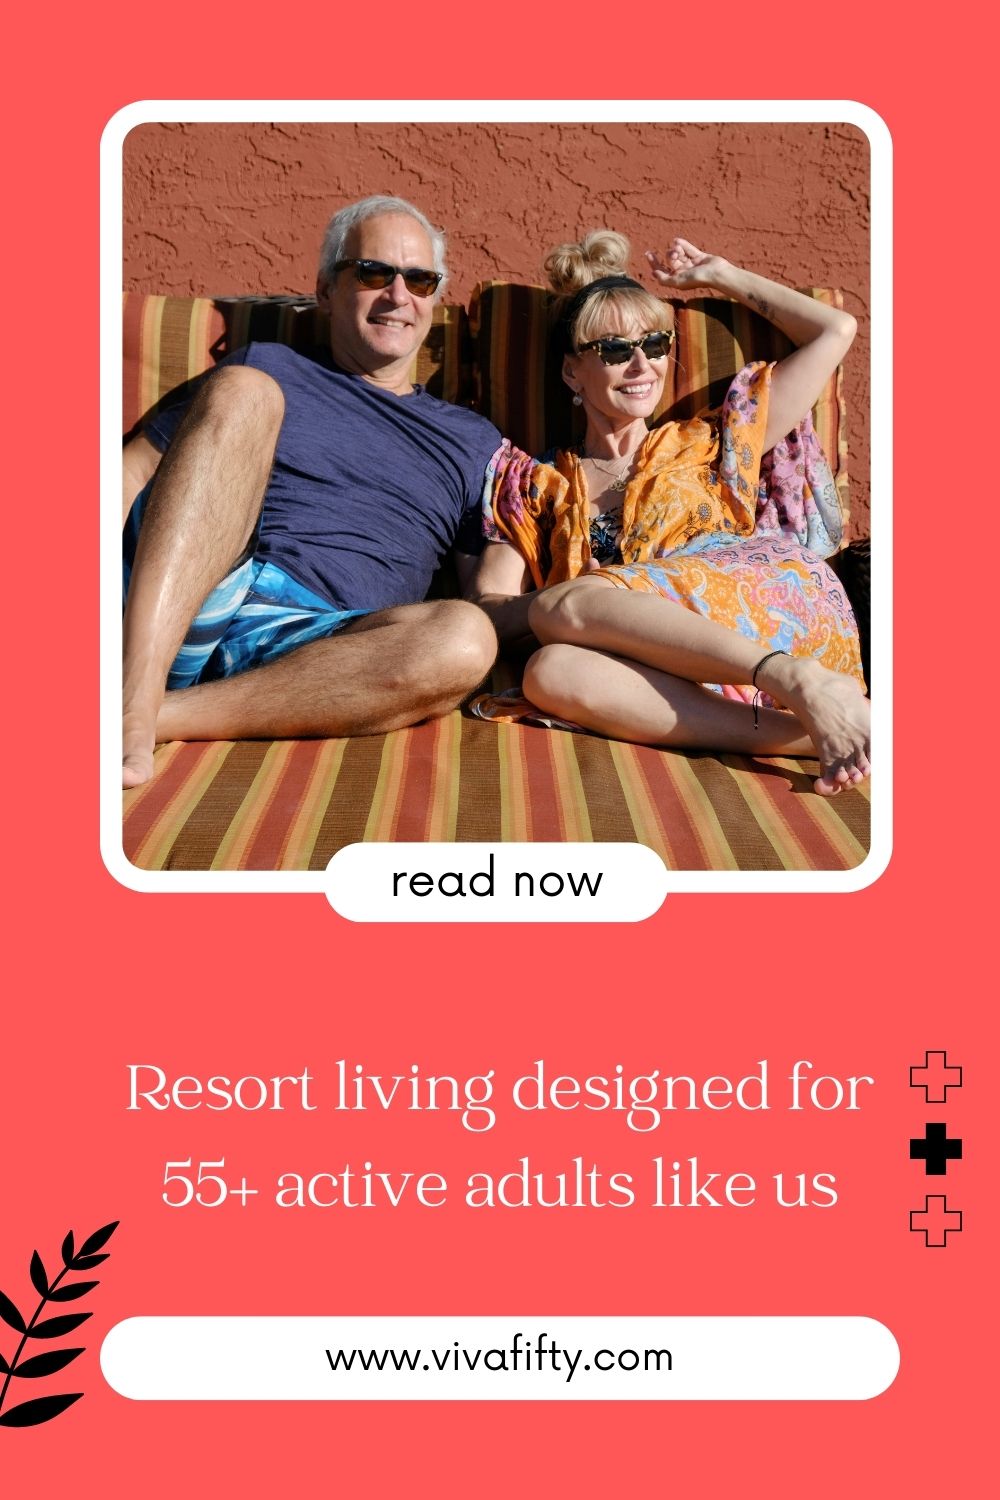 #ad My husband and I spent two days and three nights at Cal-Am Resorts, an active 55+ community. Read about our adventures and how you too could recreate this vacation.